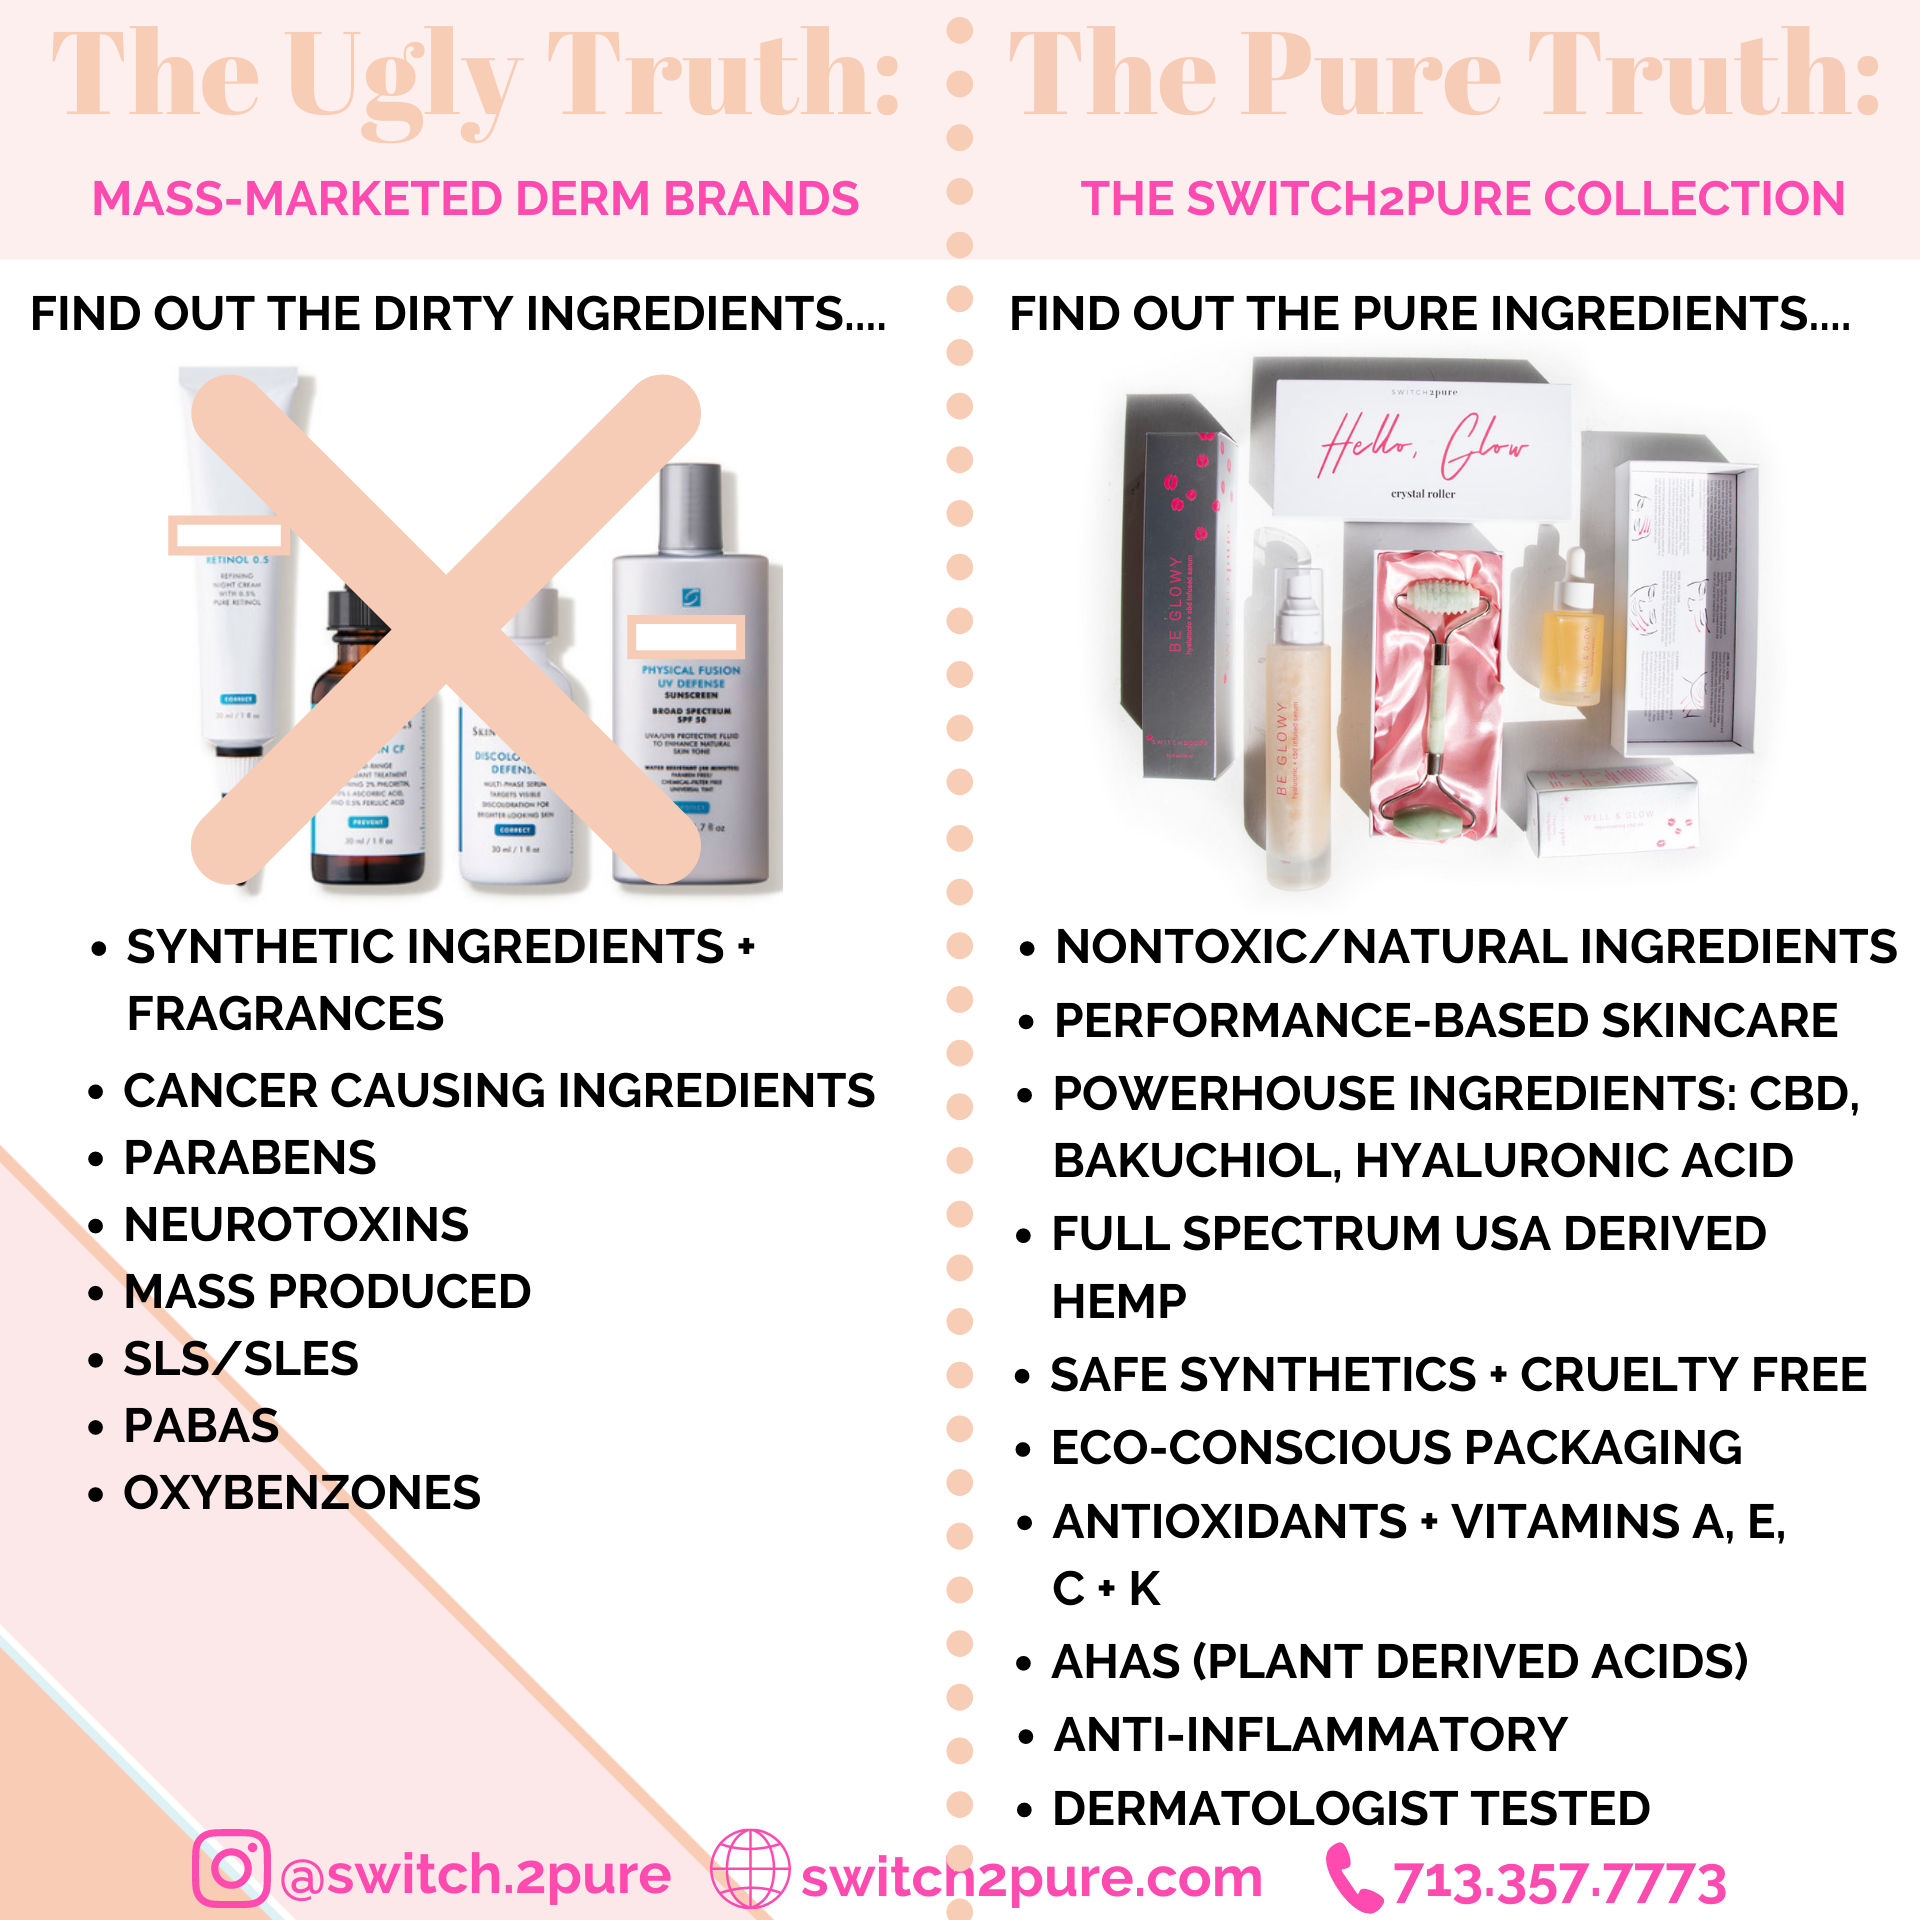 Switch2Pure The Ugly Truth: side by side list of harmful ingredients found in skincare next to list of safe, non-toxic clean ingredients and products. All clean, non-toxic products can be found at Switch2Pure